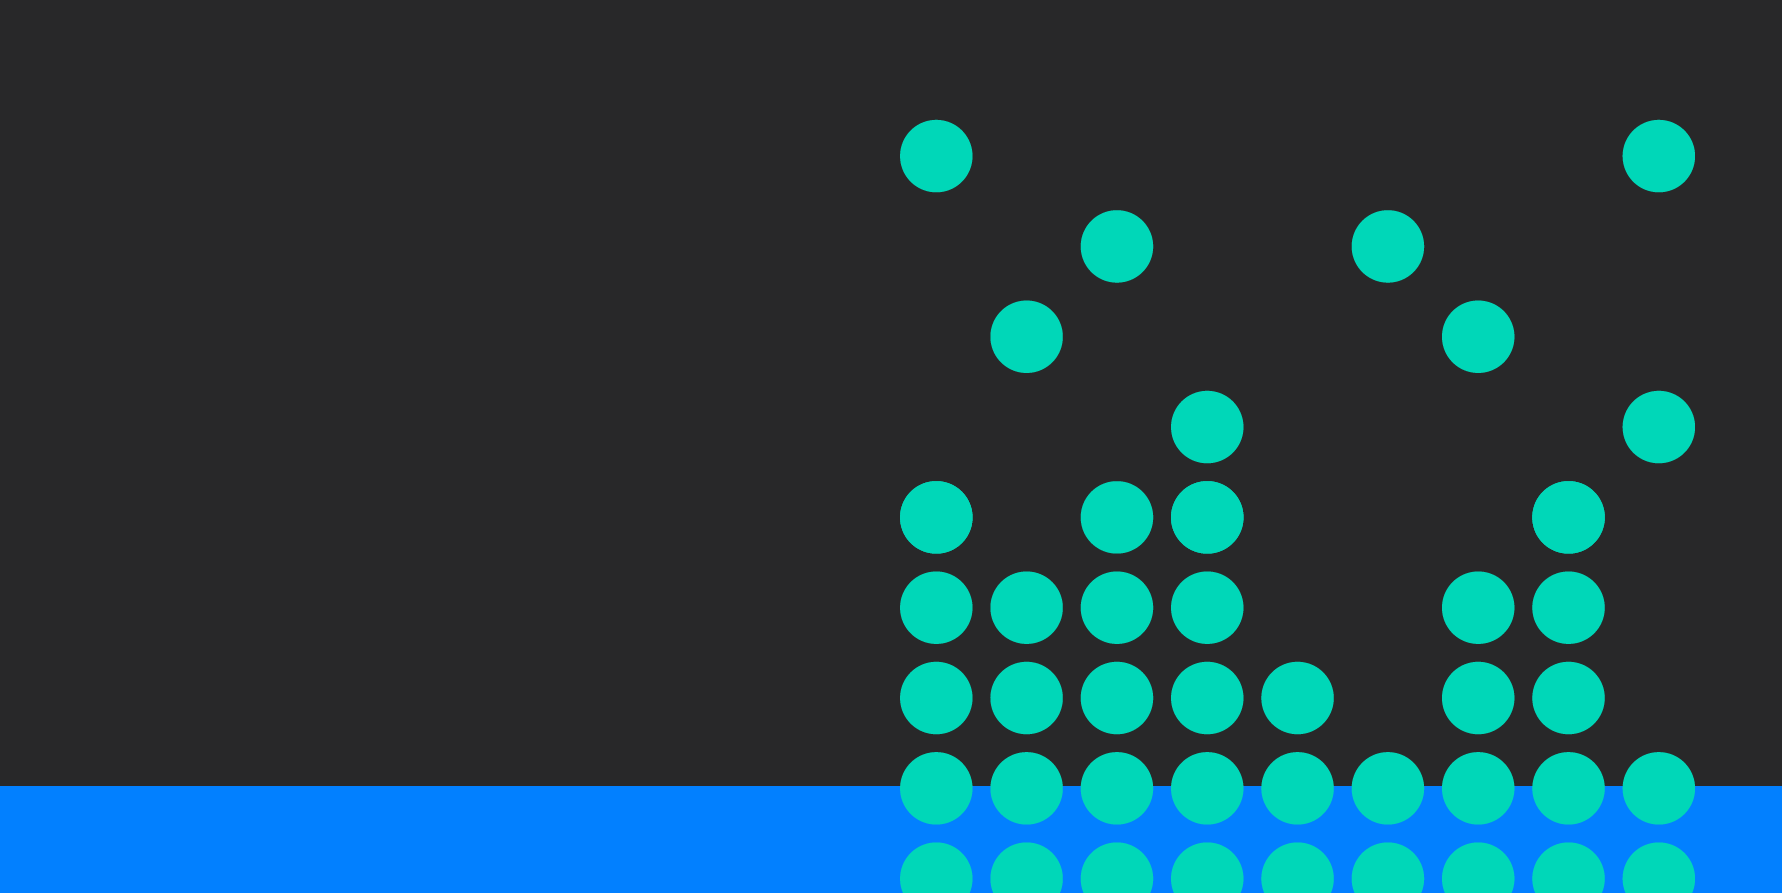 Illustration of small green circles floating up out of a grid formation on a black and blue background